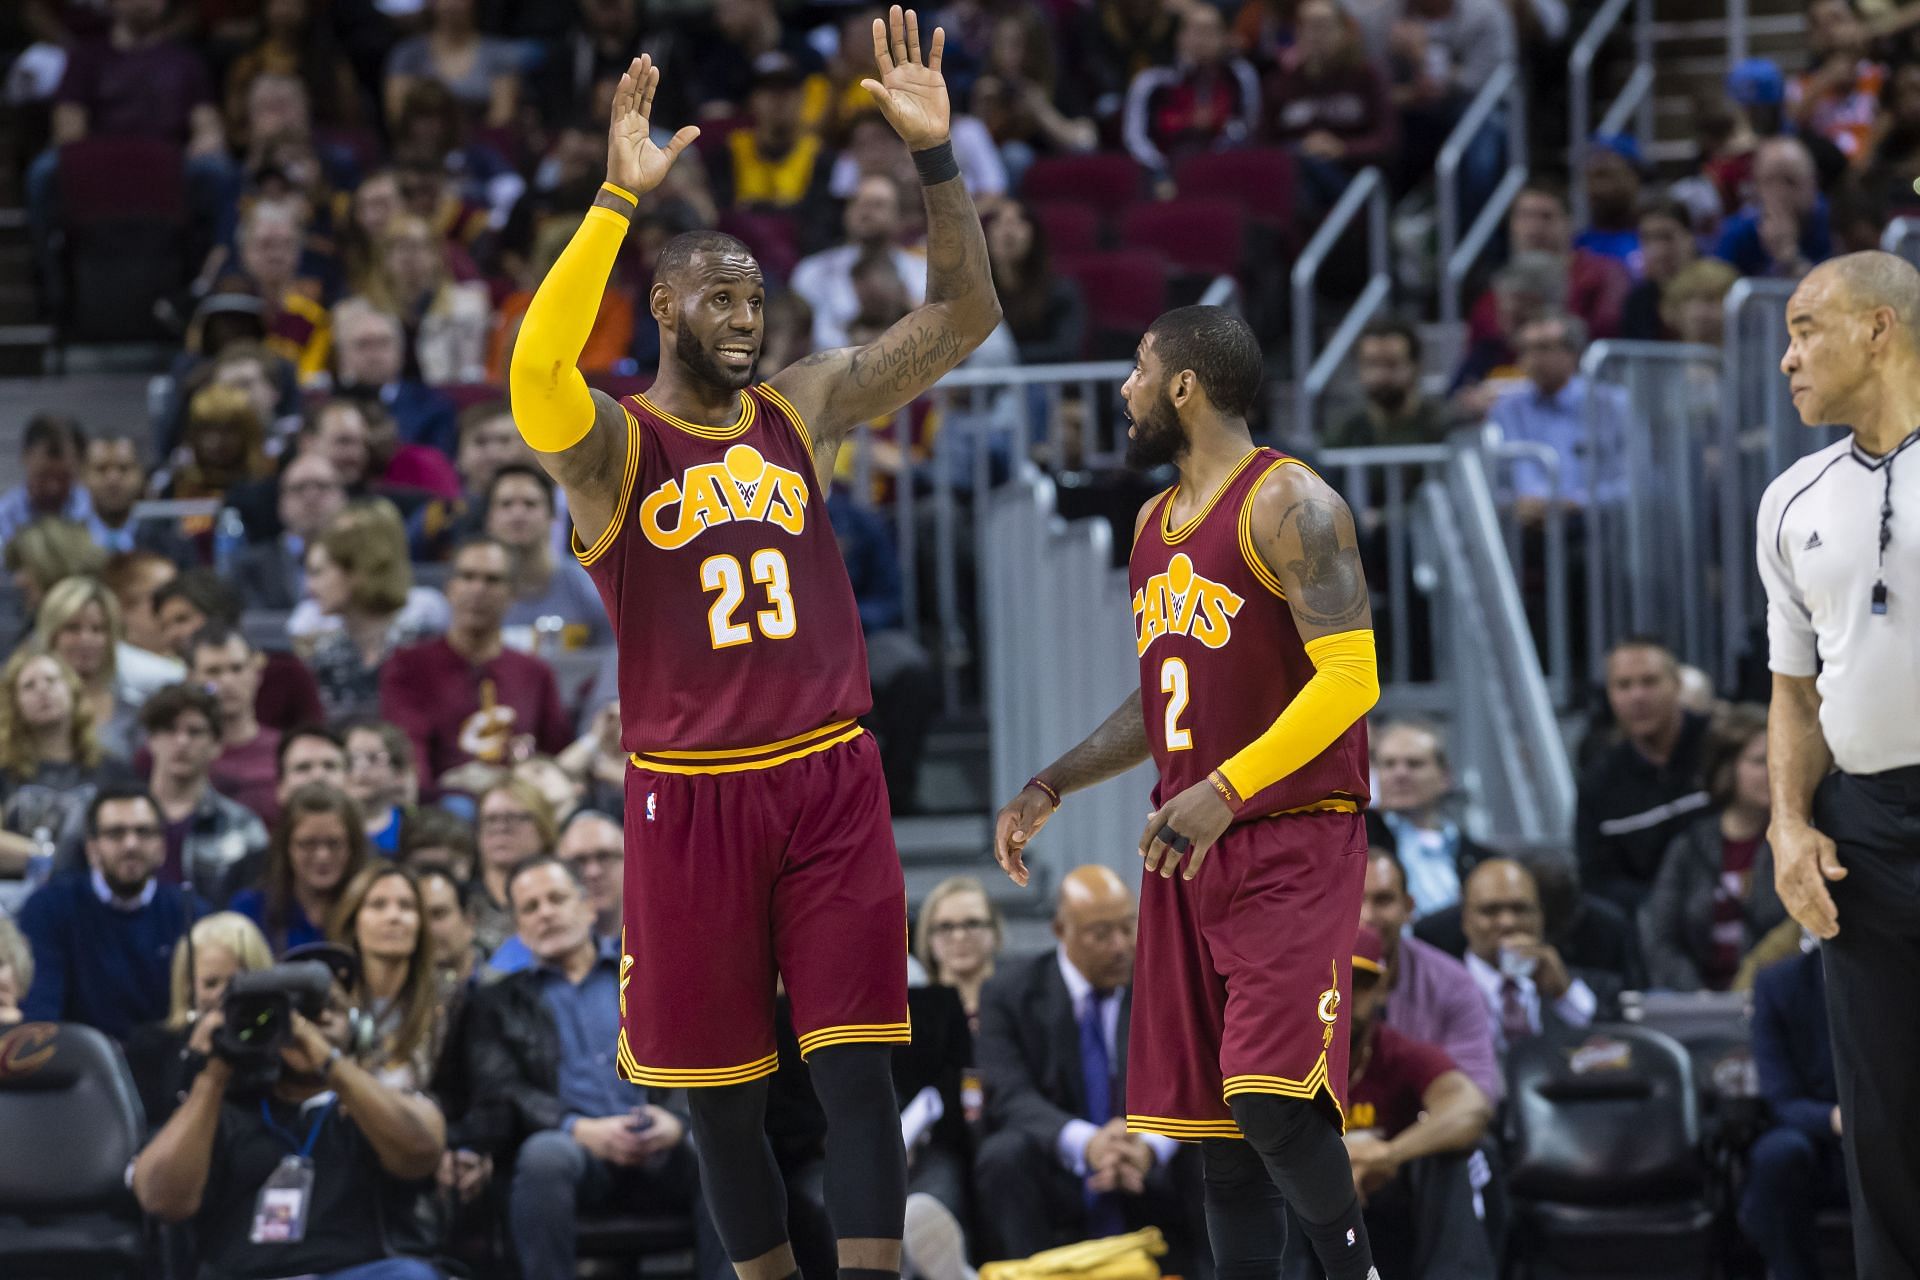 Cleveland Cavaliers stars LeBron James and Kyrie Irving share the floor as teammates in 2017.